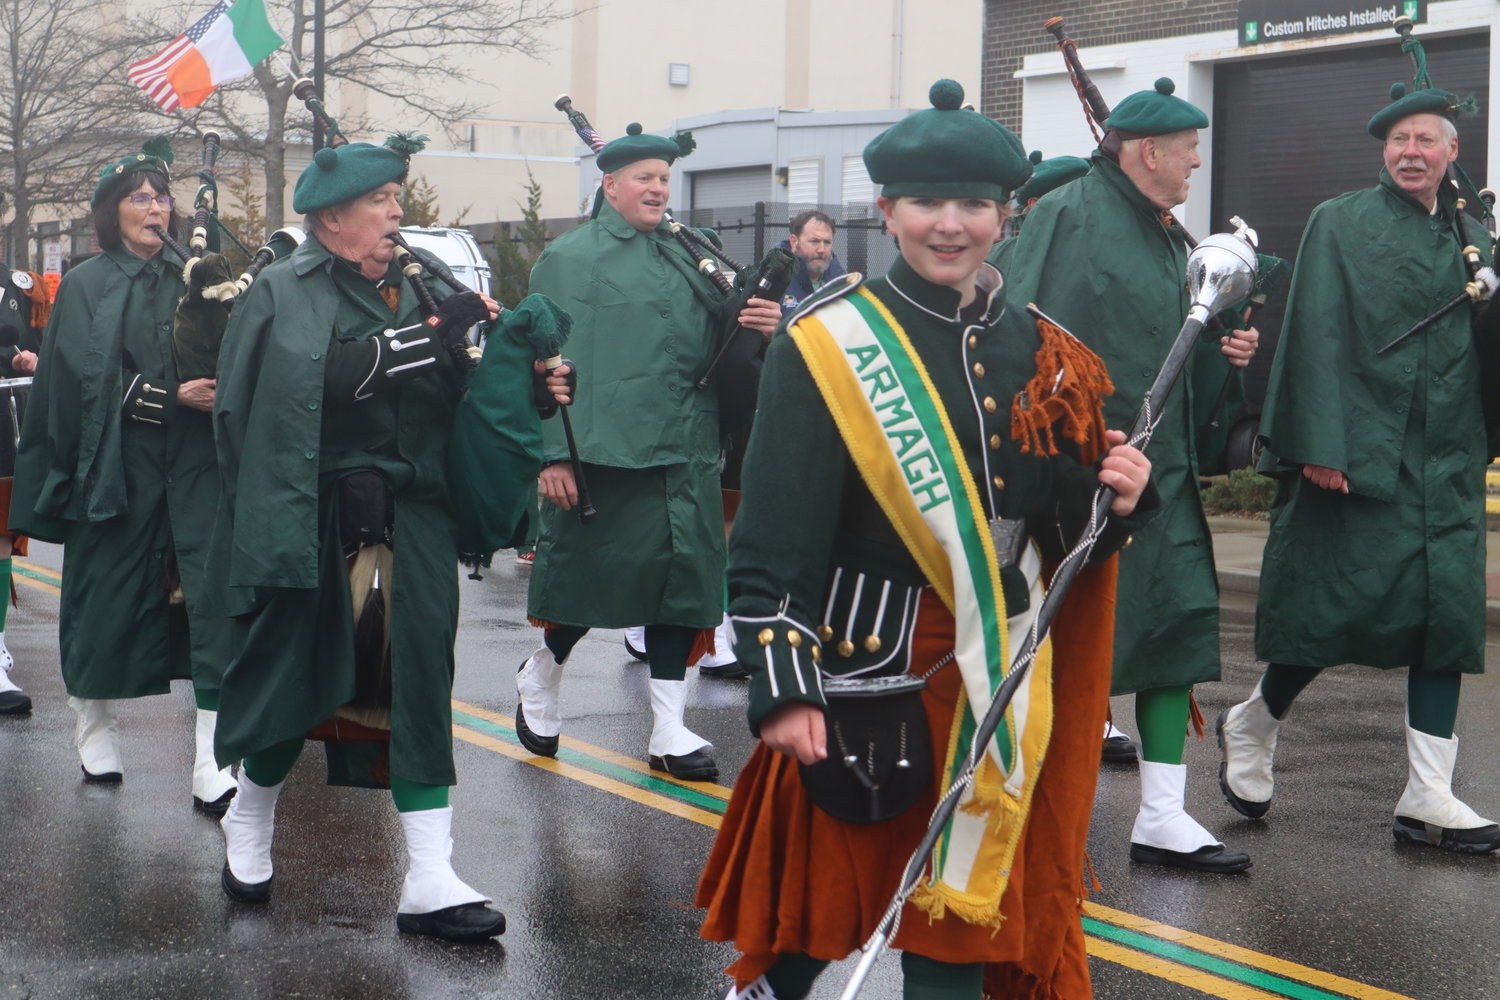 Traditional bagpipers from Armagh County, in Northern Ireland, made the journey to Rockville Centre for last weekend’s St. Patrick’s Day Parade.